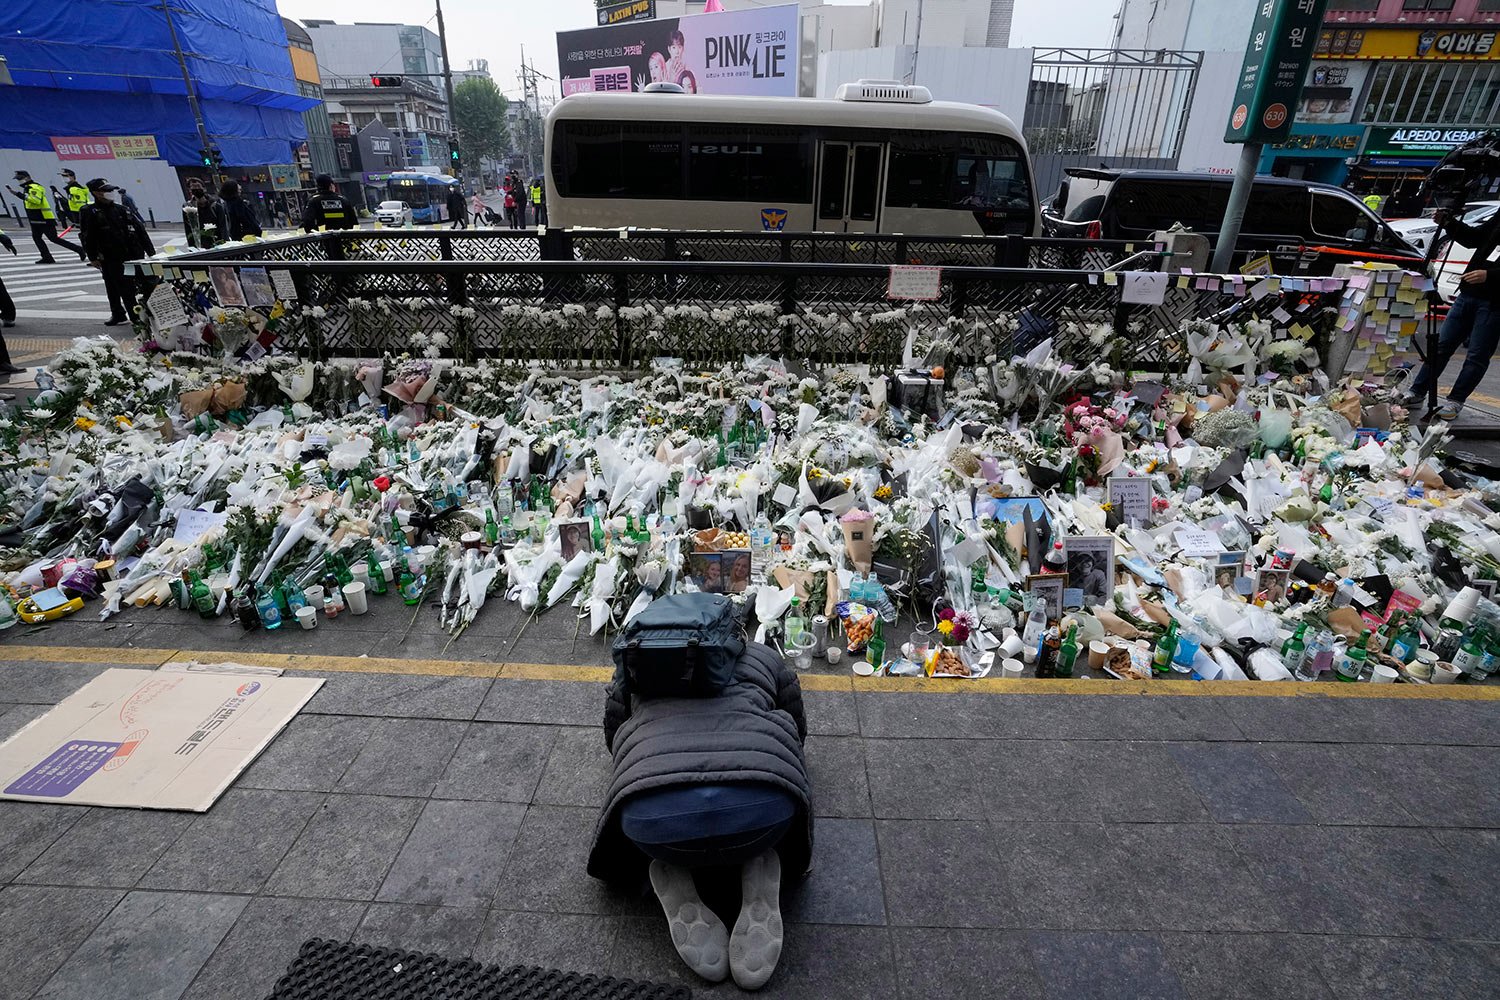  A man bows to pay tribute to victims of a deadly accident that happened during Saturday night's Halloween festivities, on a street near the scene in Seoul, South Korea, Tuesday, Nov. 1, 2022.  (AP Photo/Ahn Young-joon) 